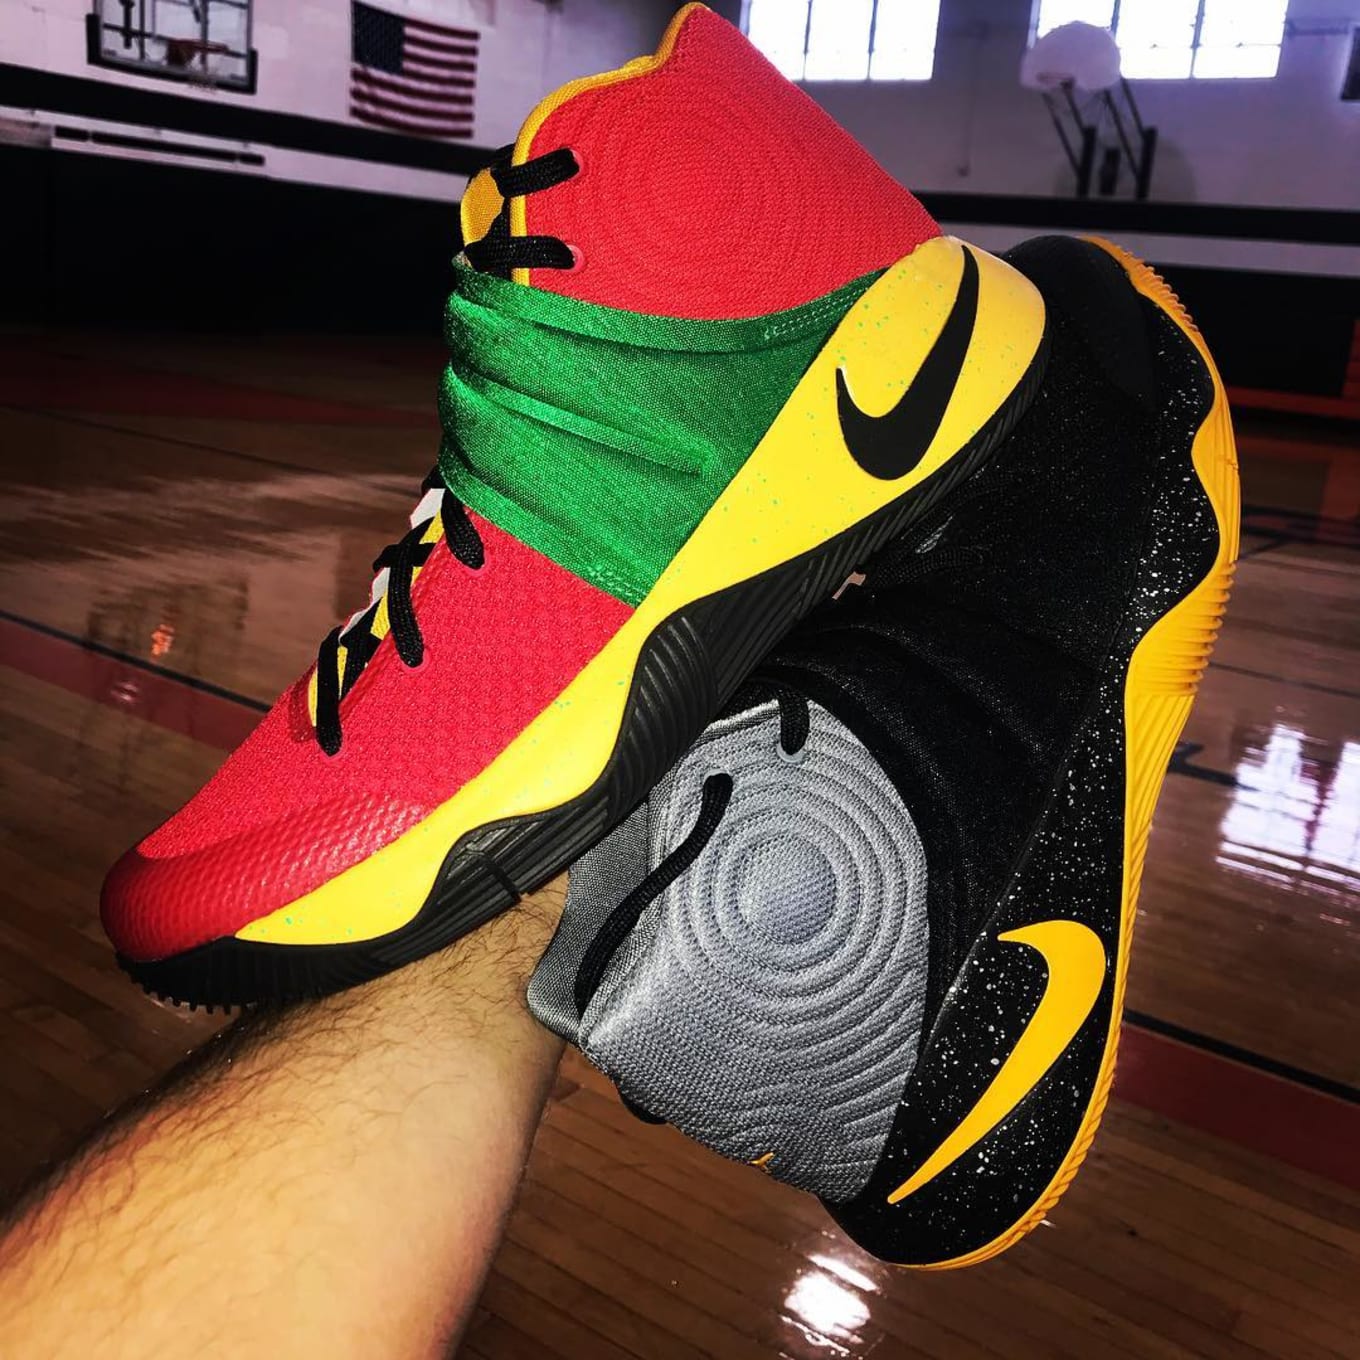 kyrie 5 end game